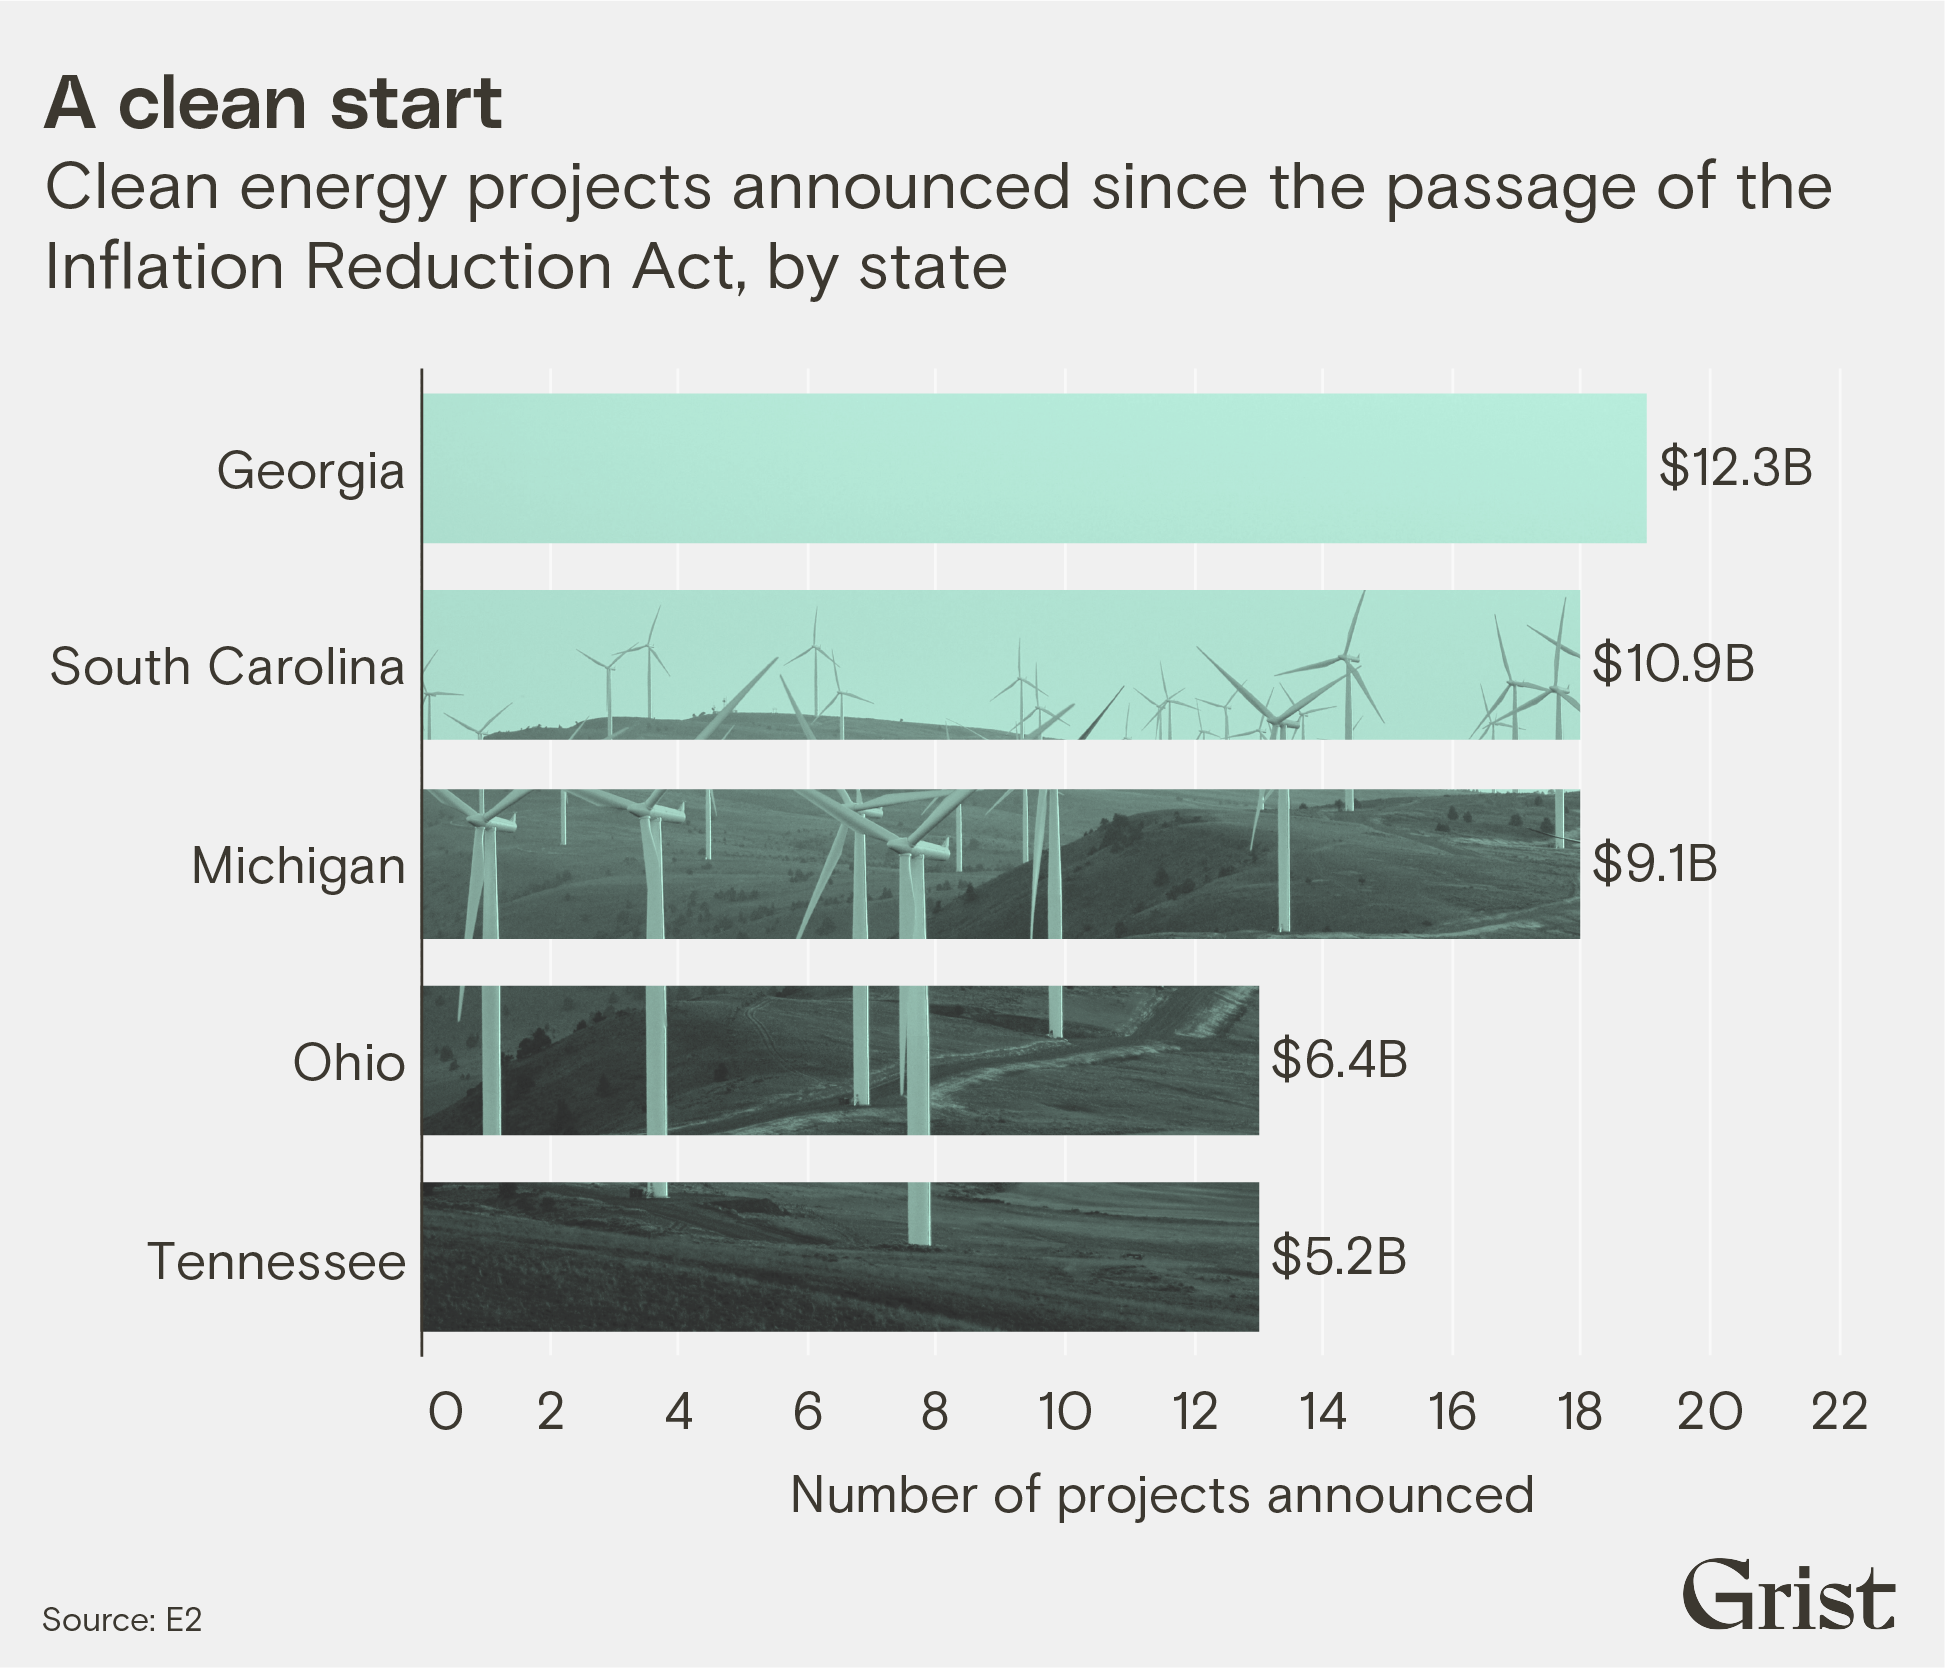 A bar chart showing clean energy projects announced since the passage of the Inflation Reduction Act, by state. Companies in Georgia have announced 19 projects (for $12.3B) since the passage of the IRA.